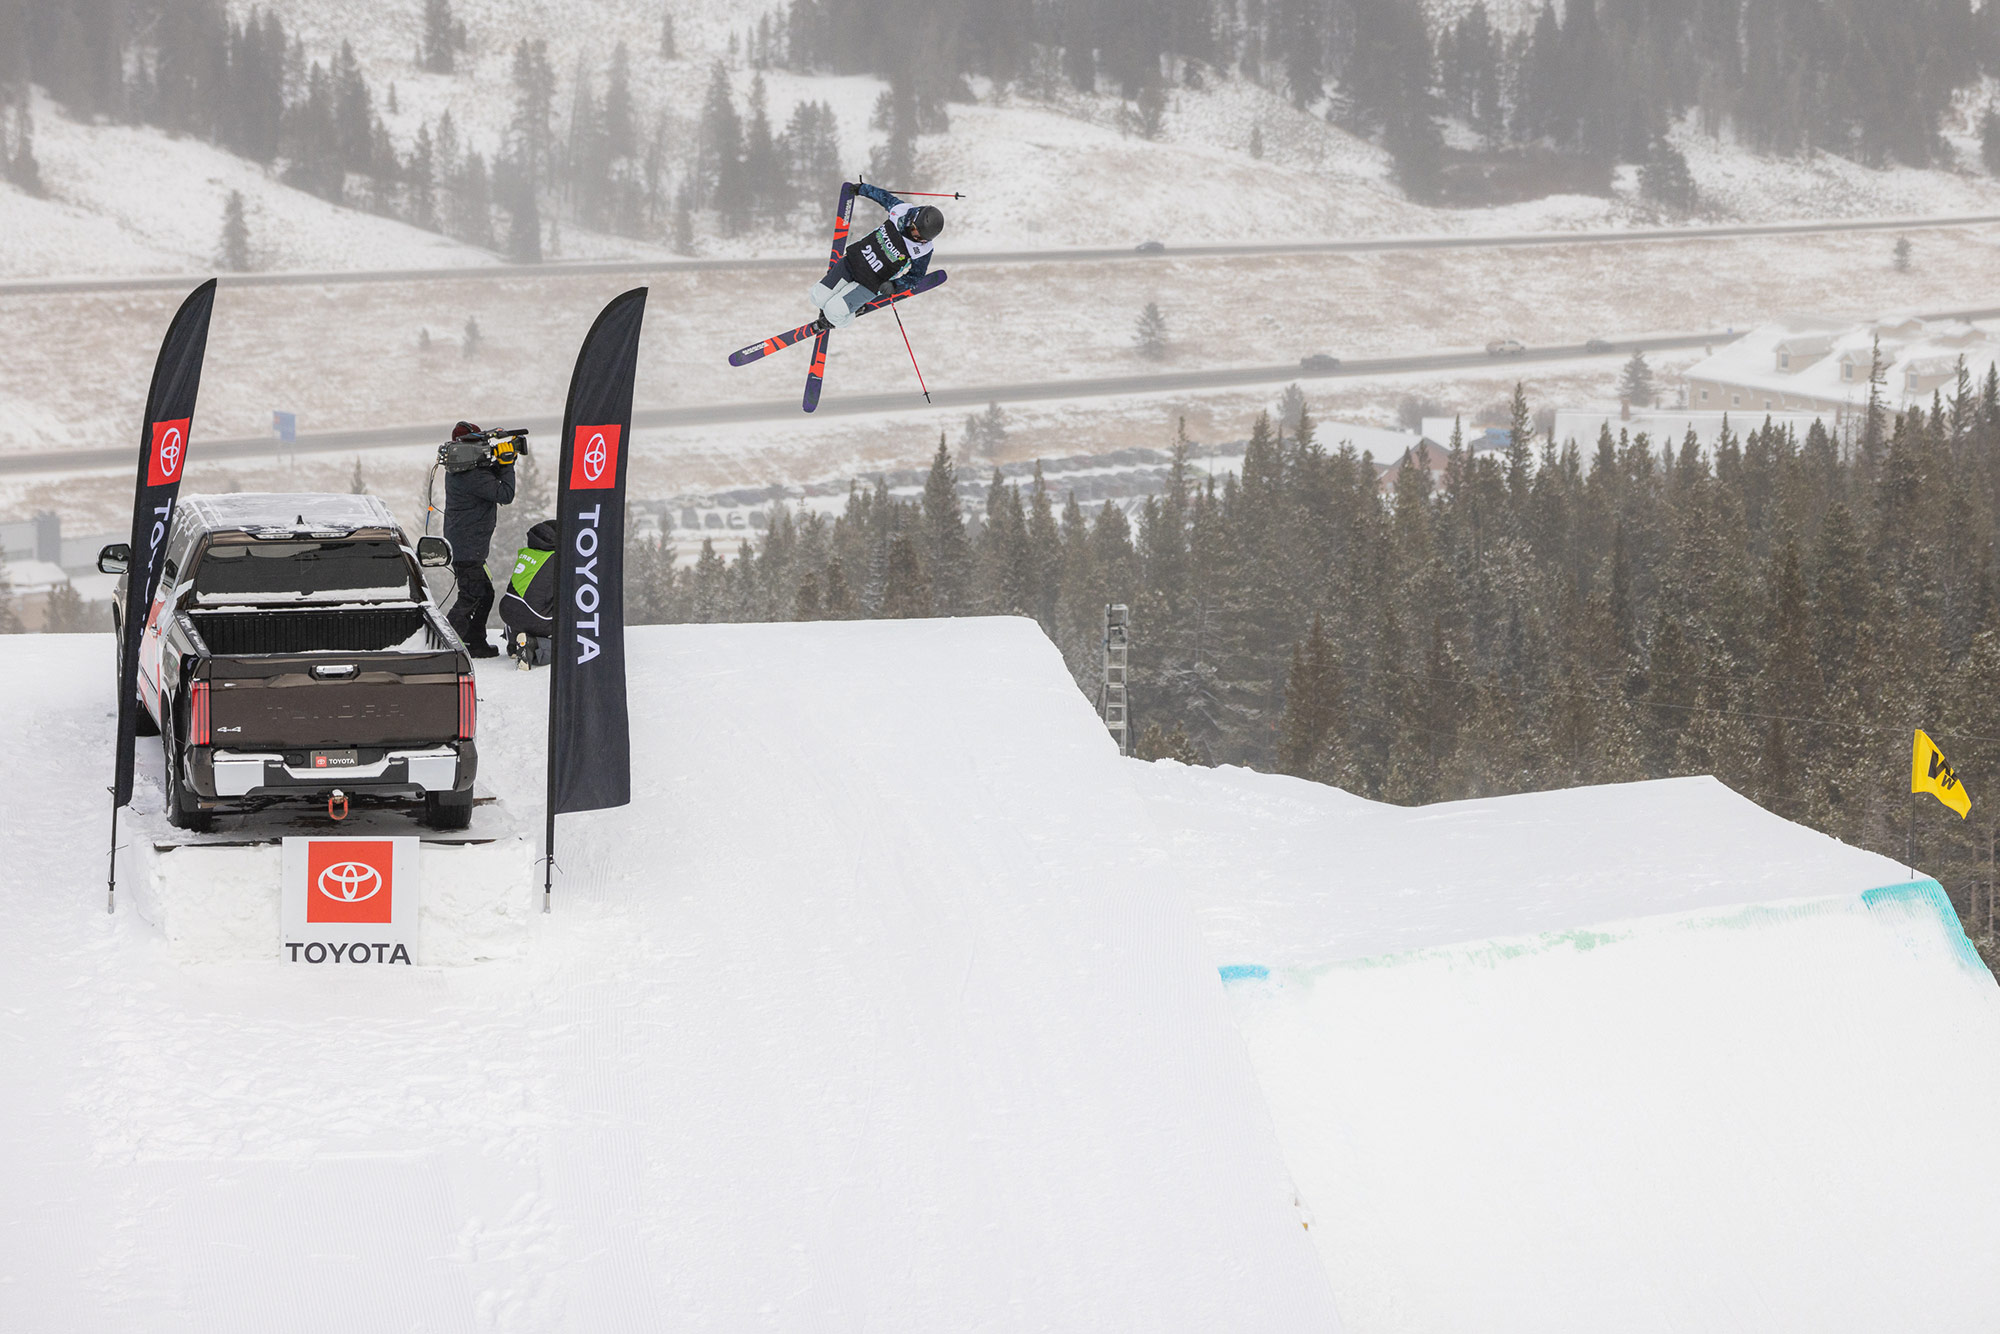 Johanne Killi competes in womens ski slopestyl finals at the 2021 Winter Dew tour.